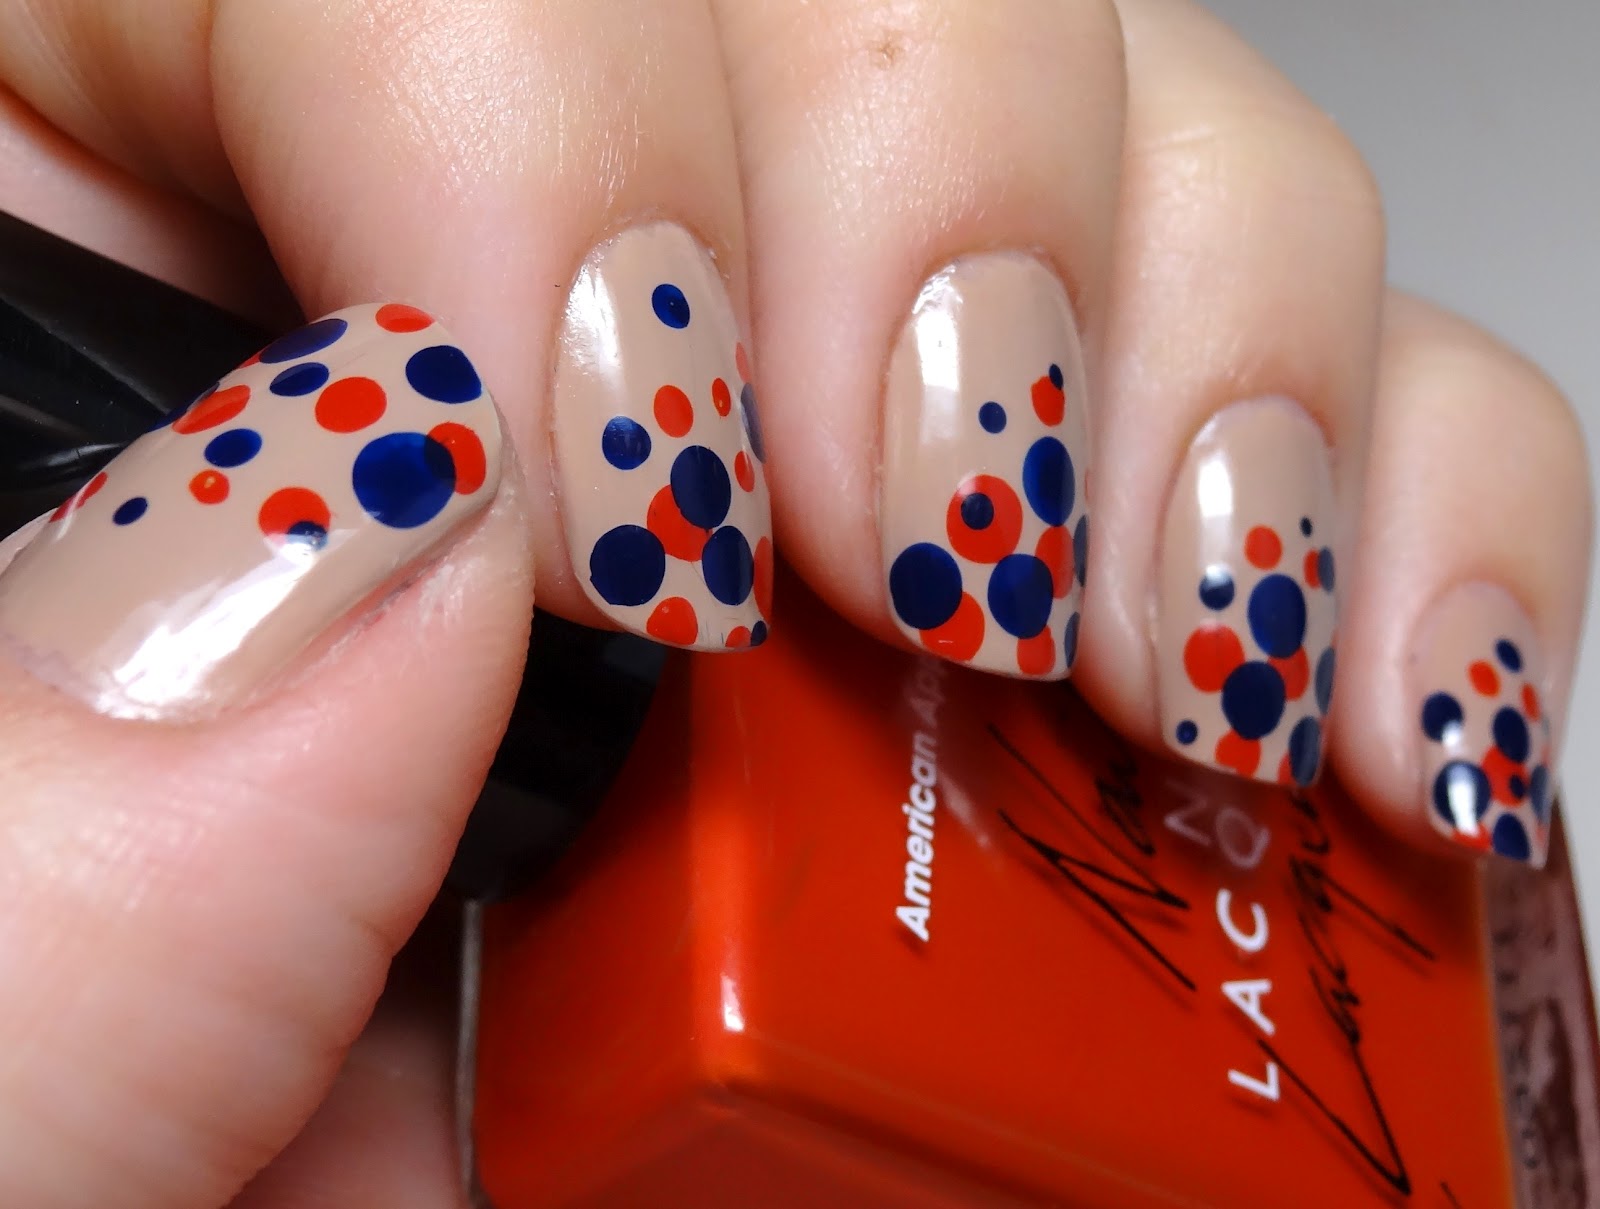 Frivolous Finishes: Copycat Dot Manicure - So cute I had to steal it!